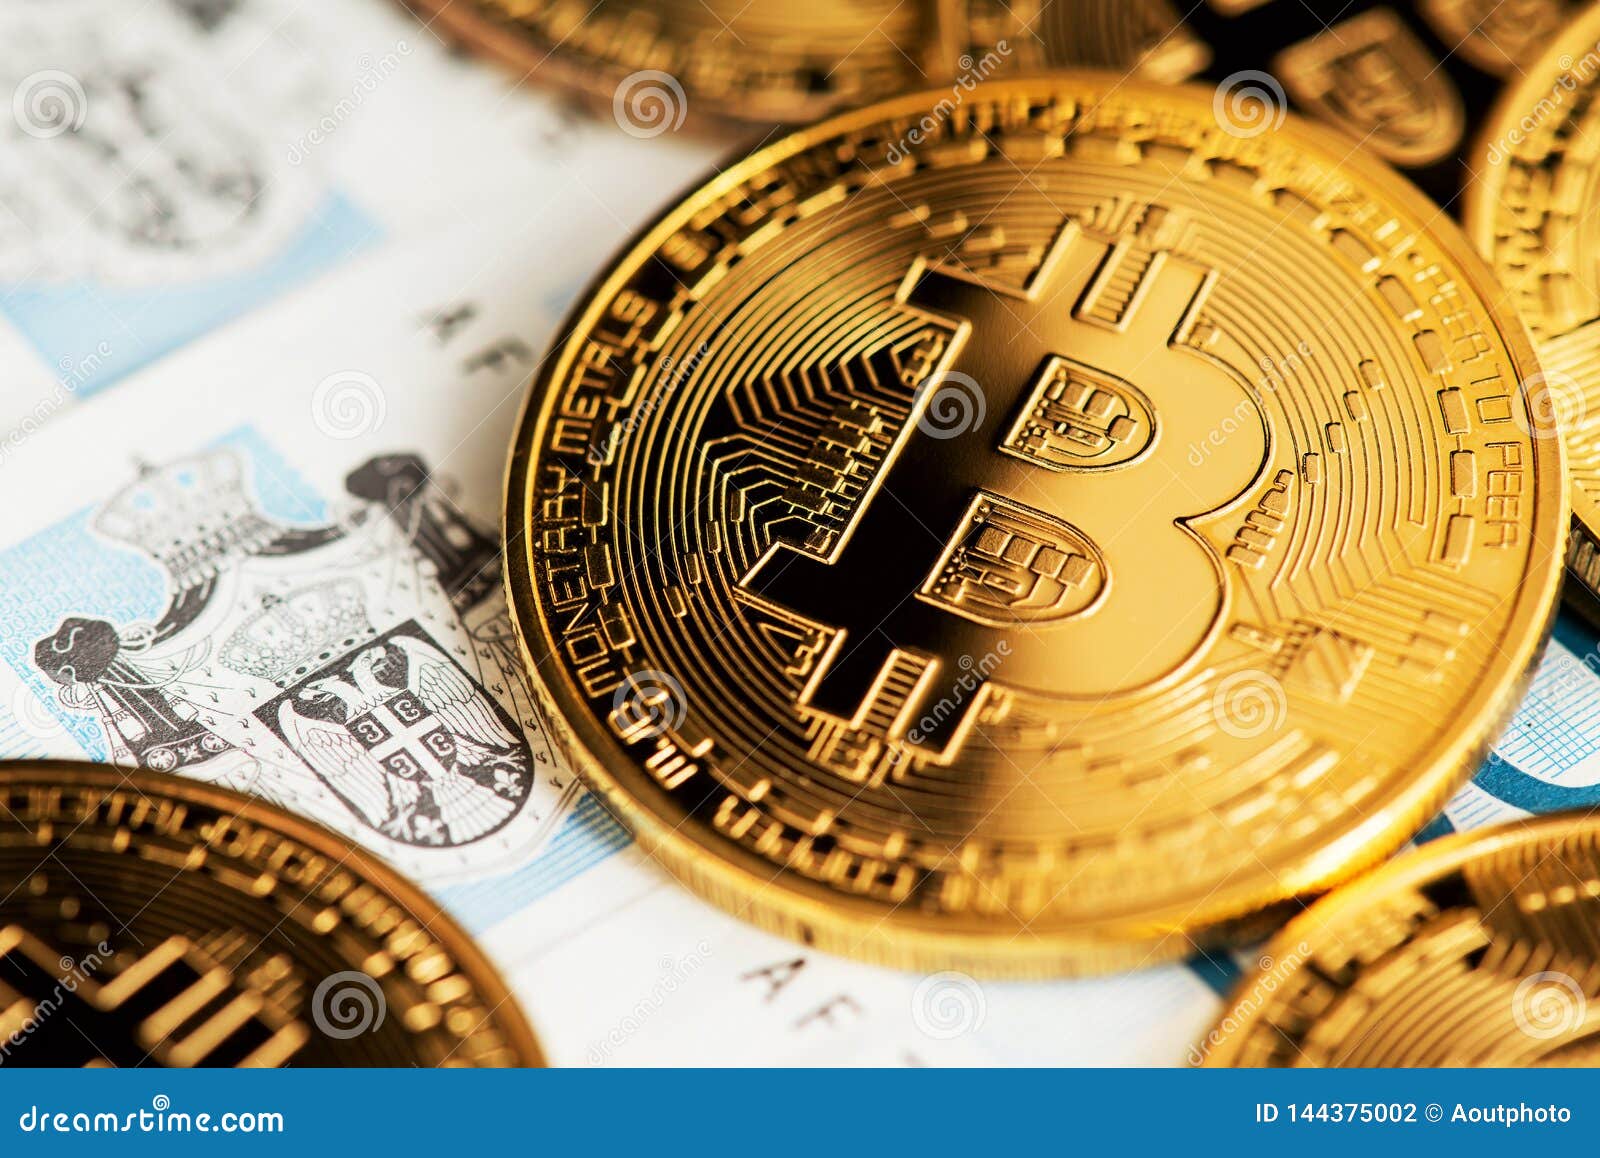 Close Up Image Of Bitcoin Cryptocurrency With Serbian Dinar Banknotes ...